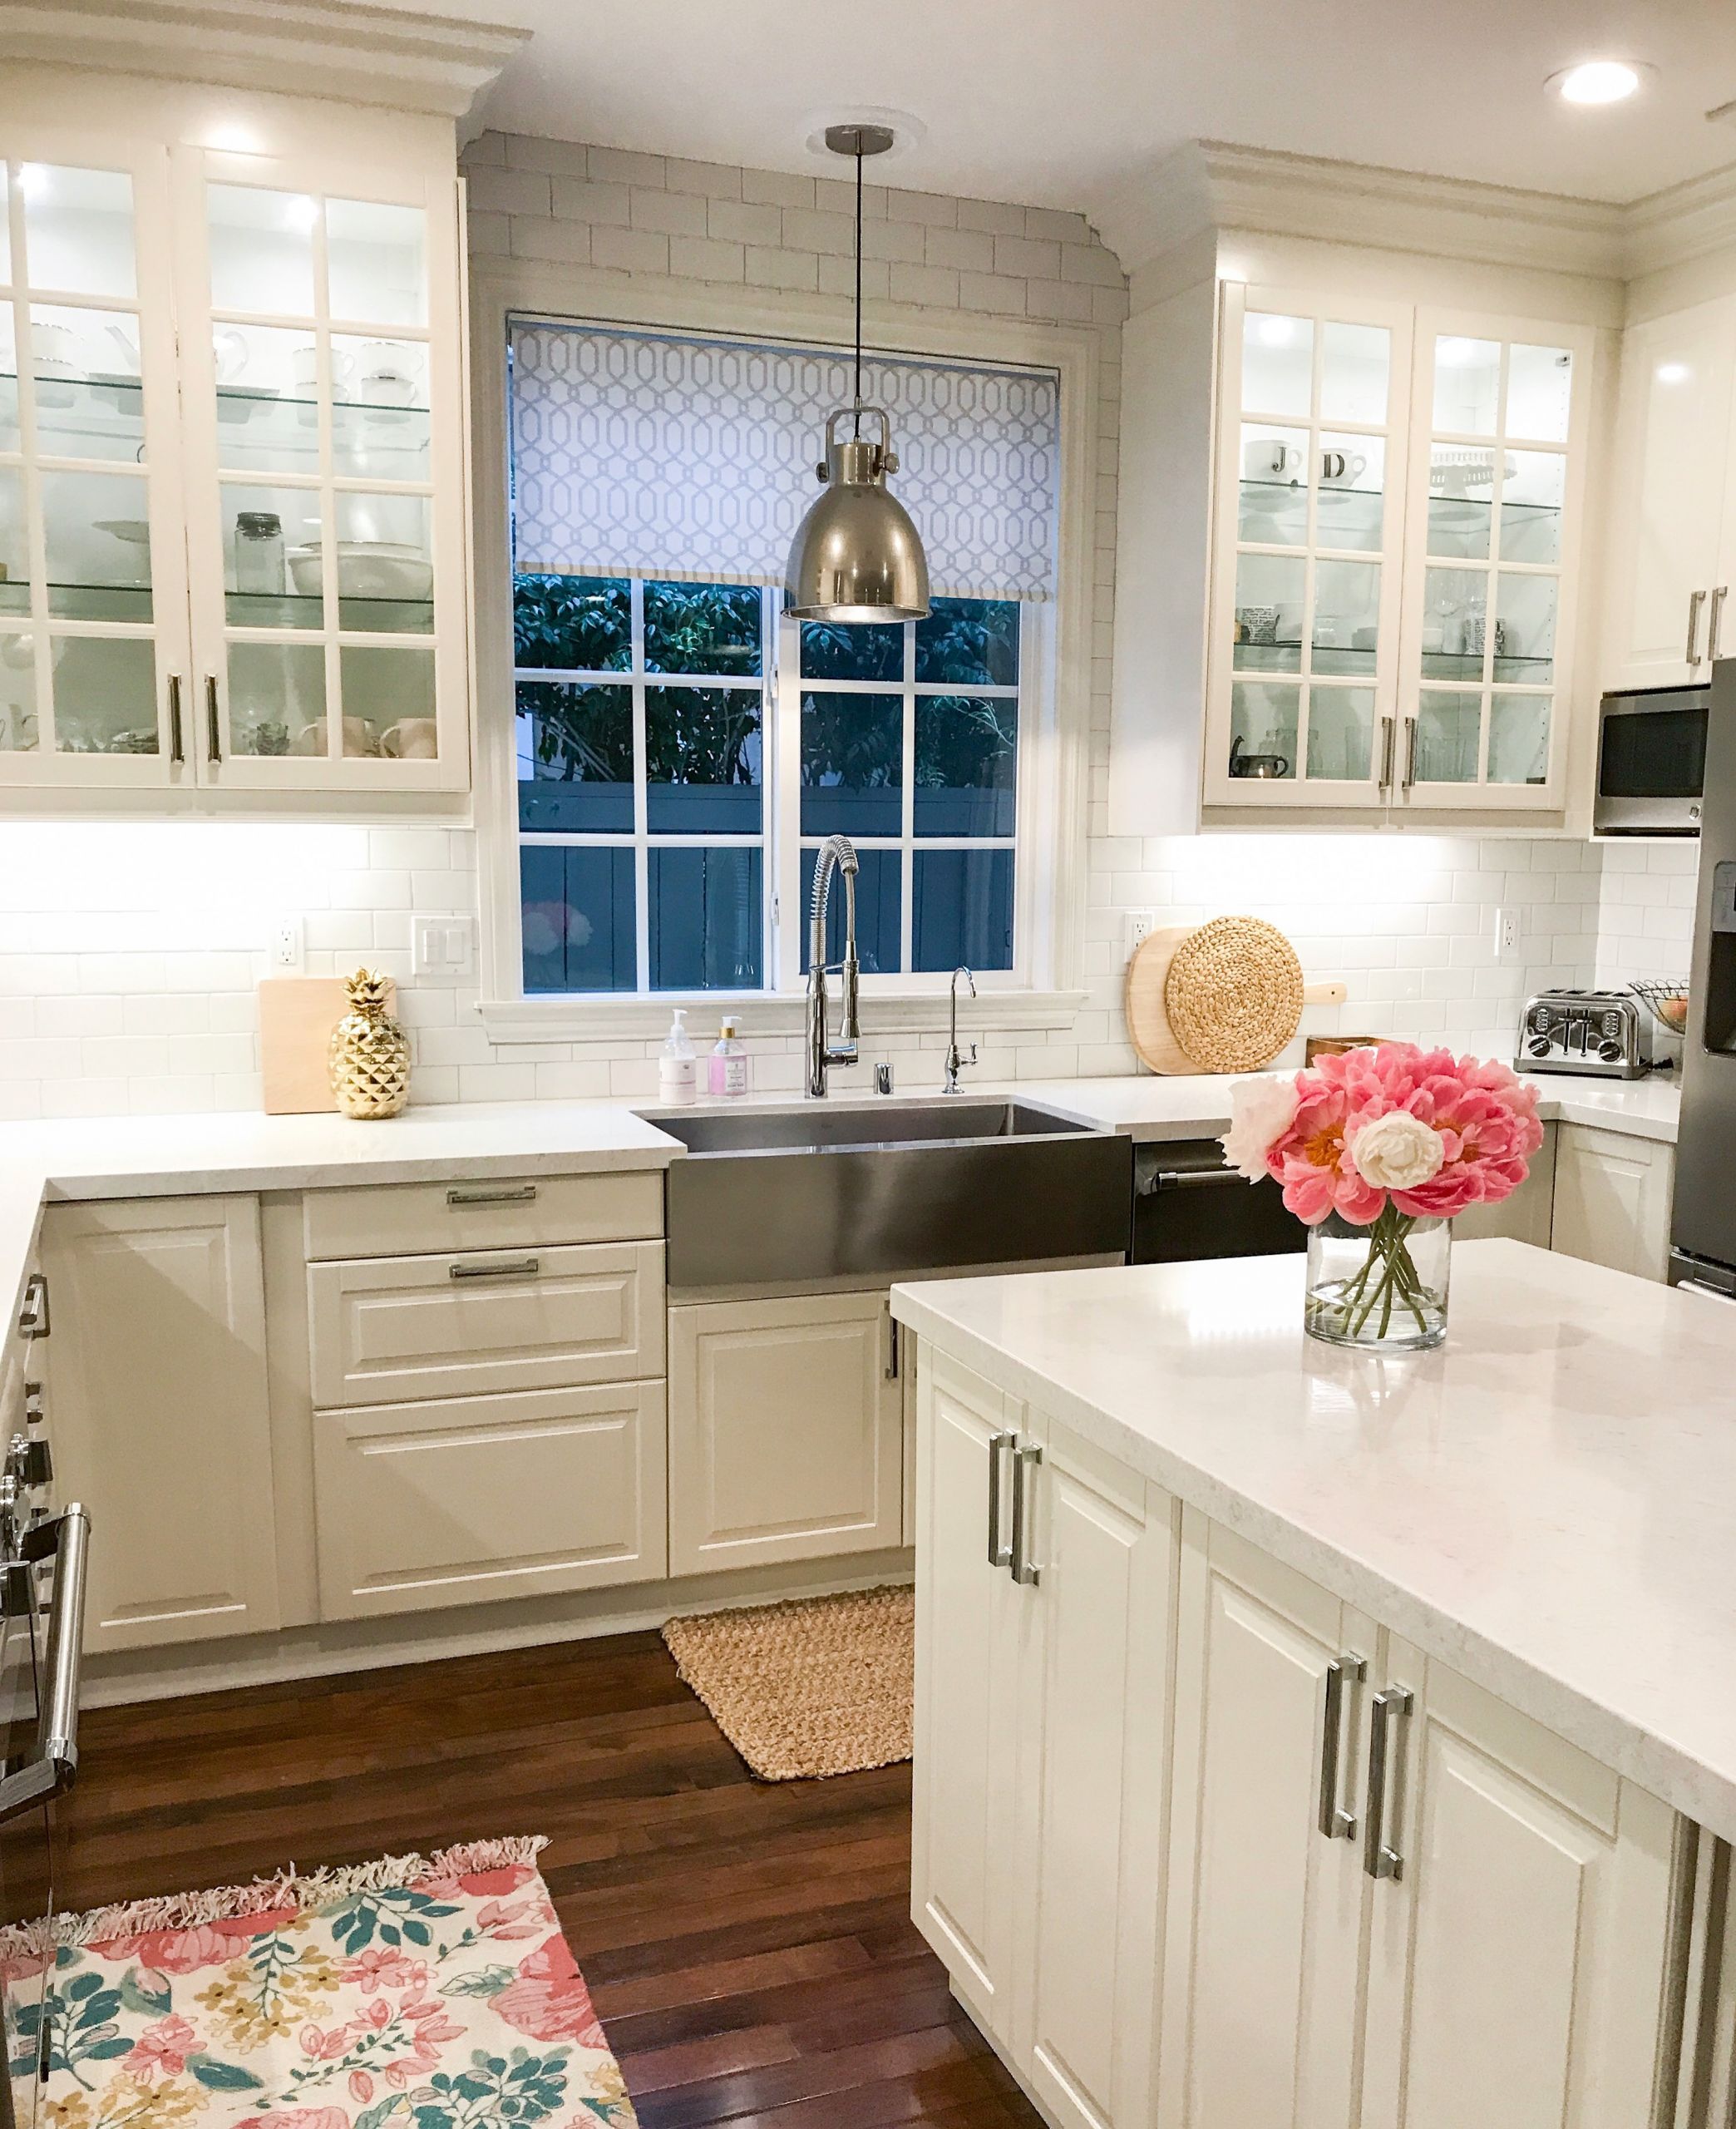 Ikea Kitchen Lighting
 How to Customize Your IKEA Kitchen 10 Tips to Make it